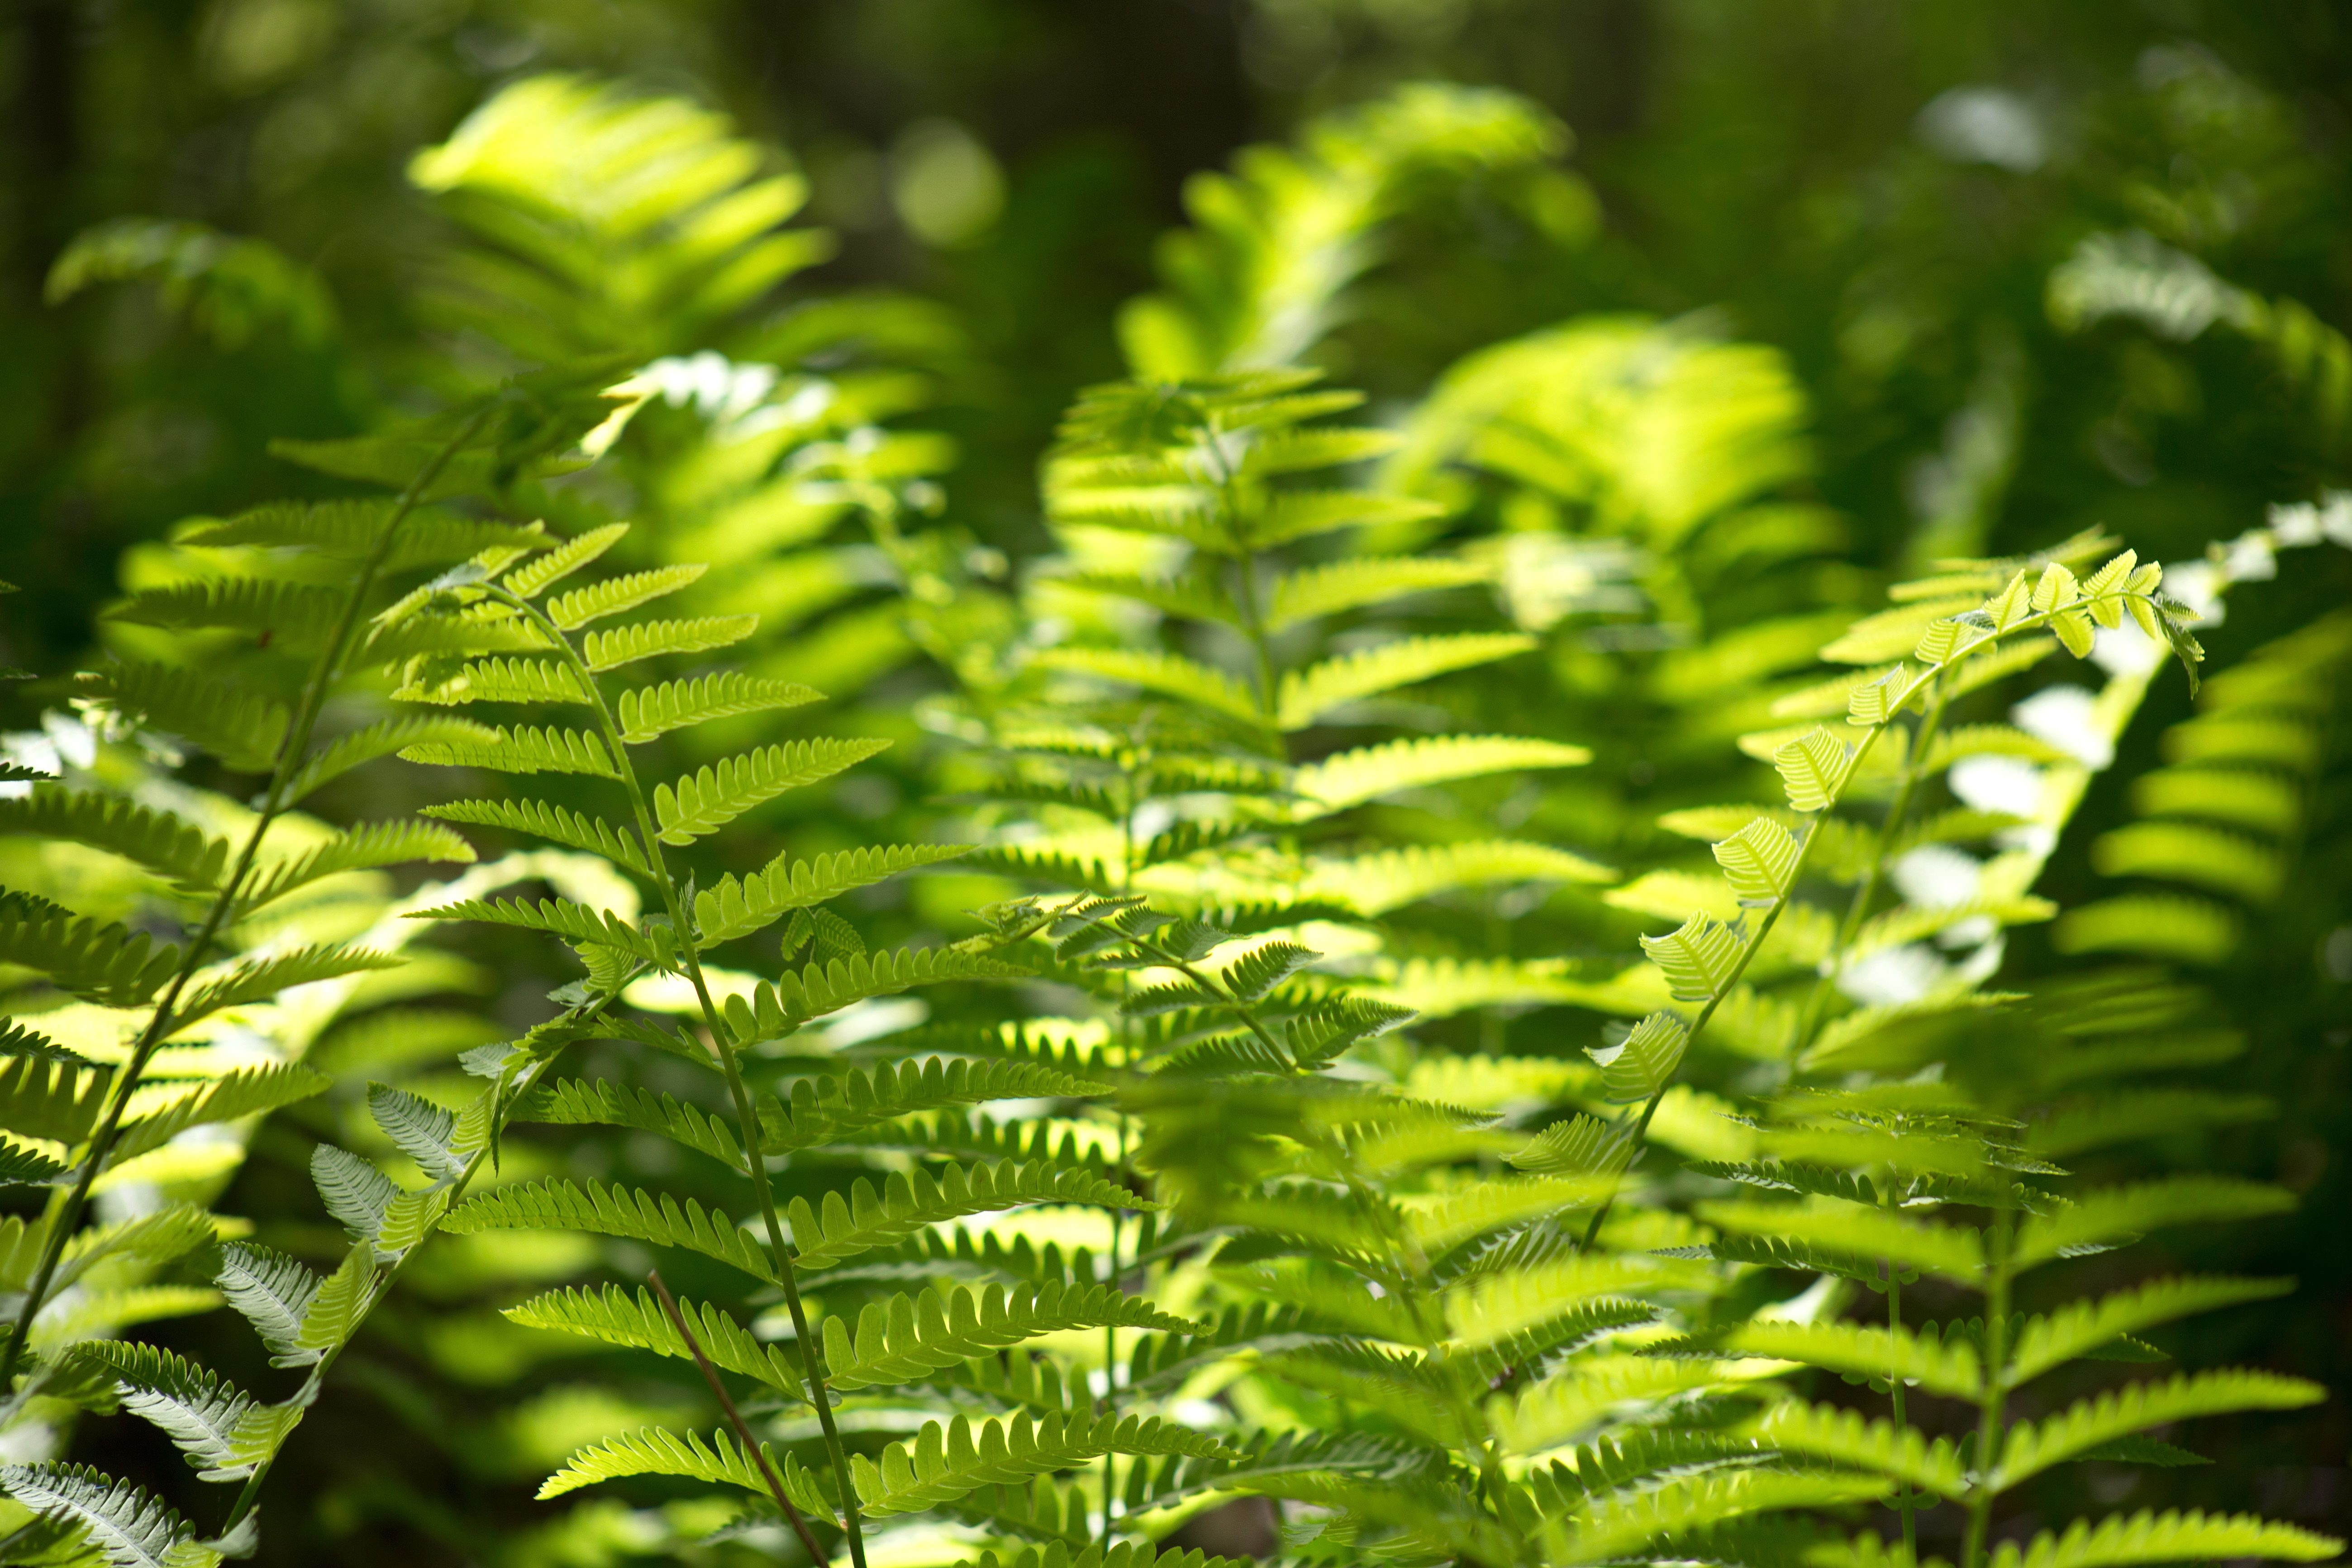 Free picture: fern leaves, green fern plants, forest, woods